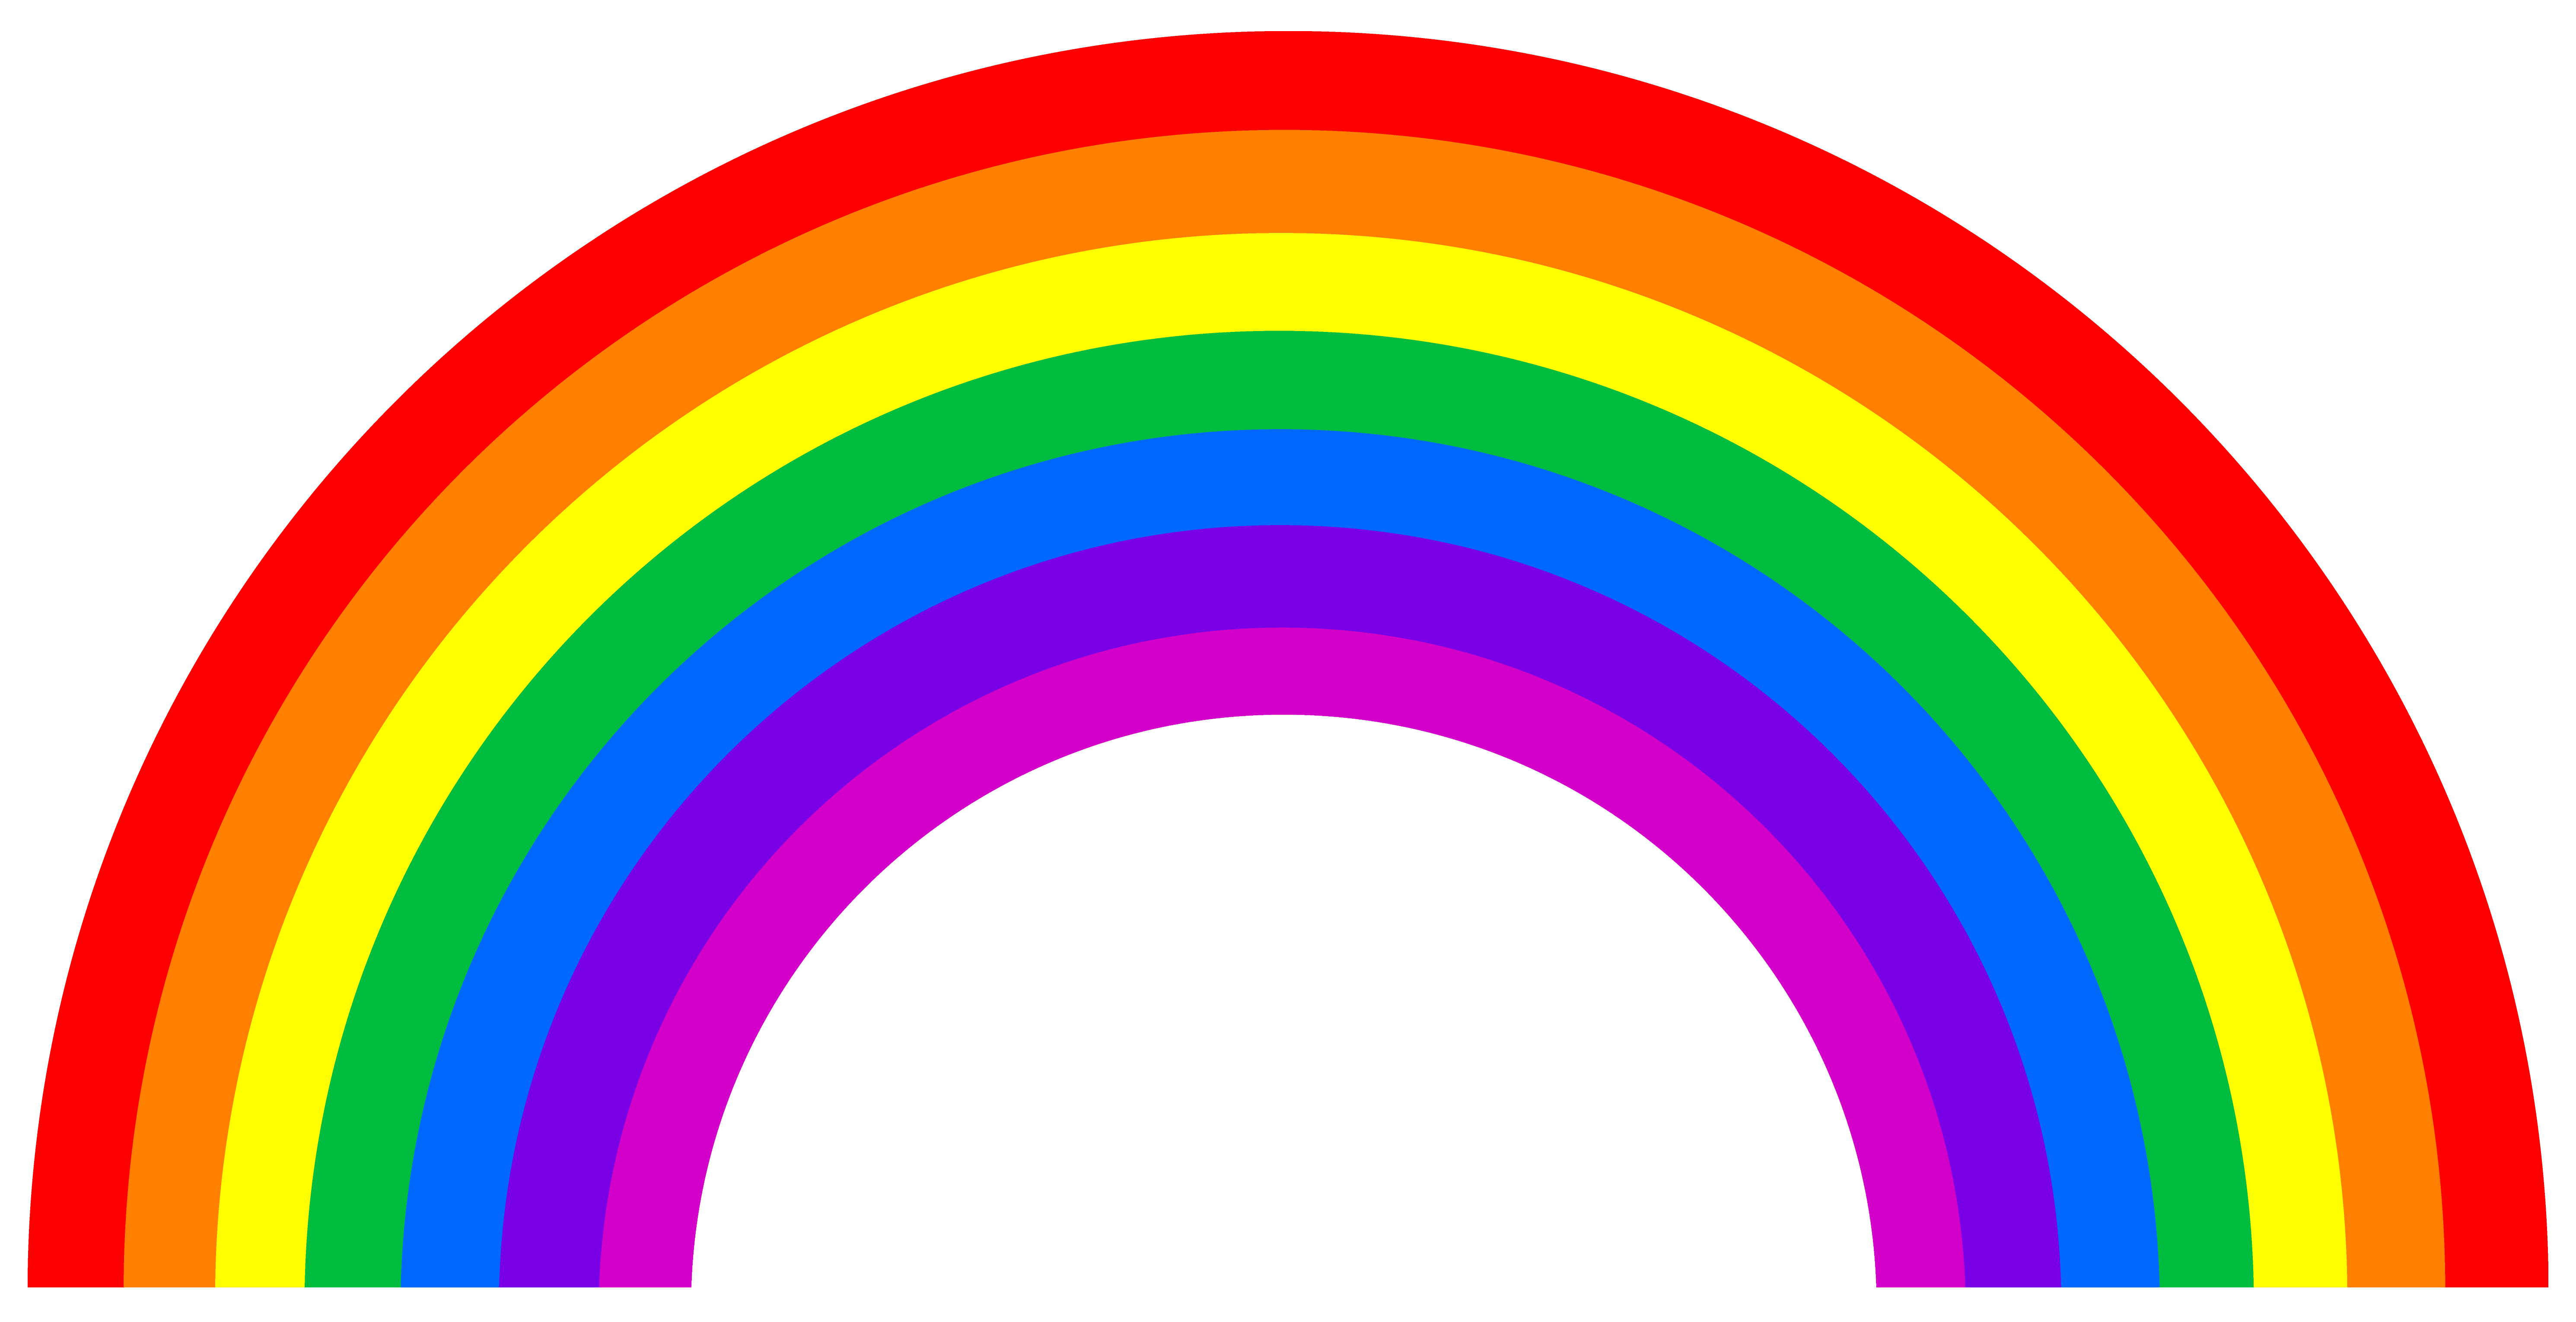 Free clipart images rainbow